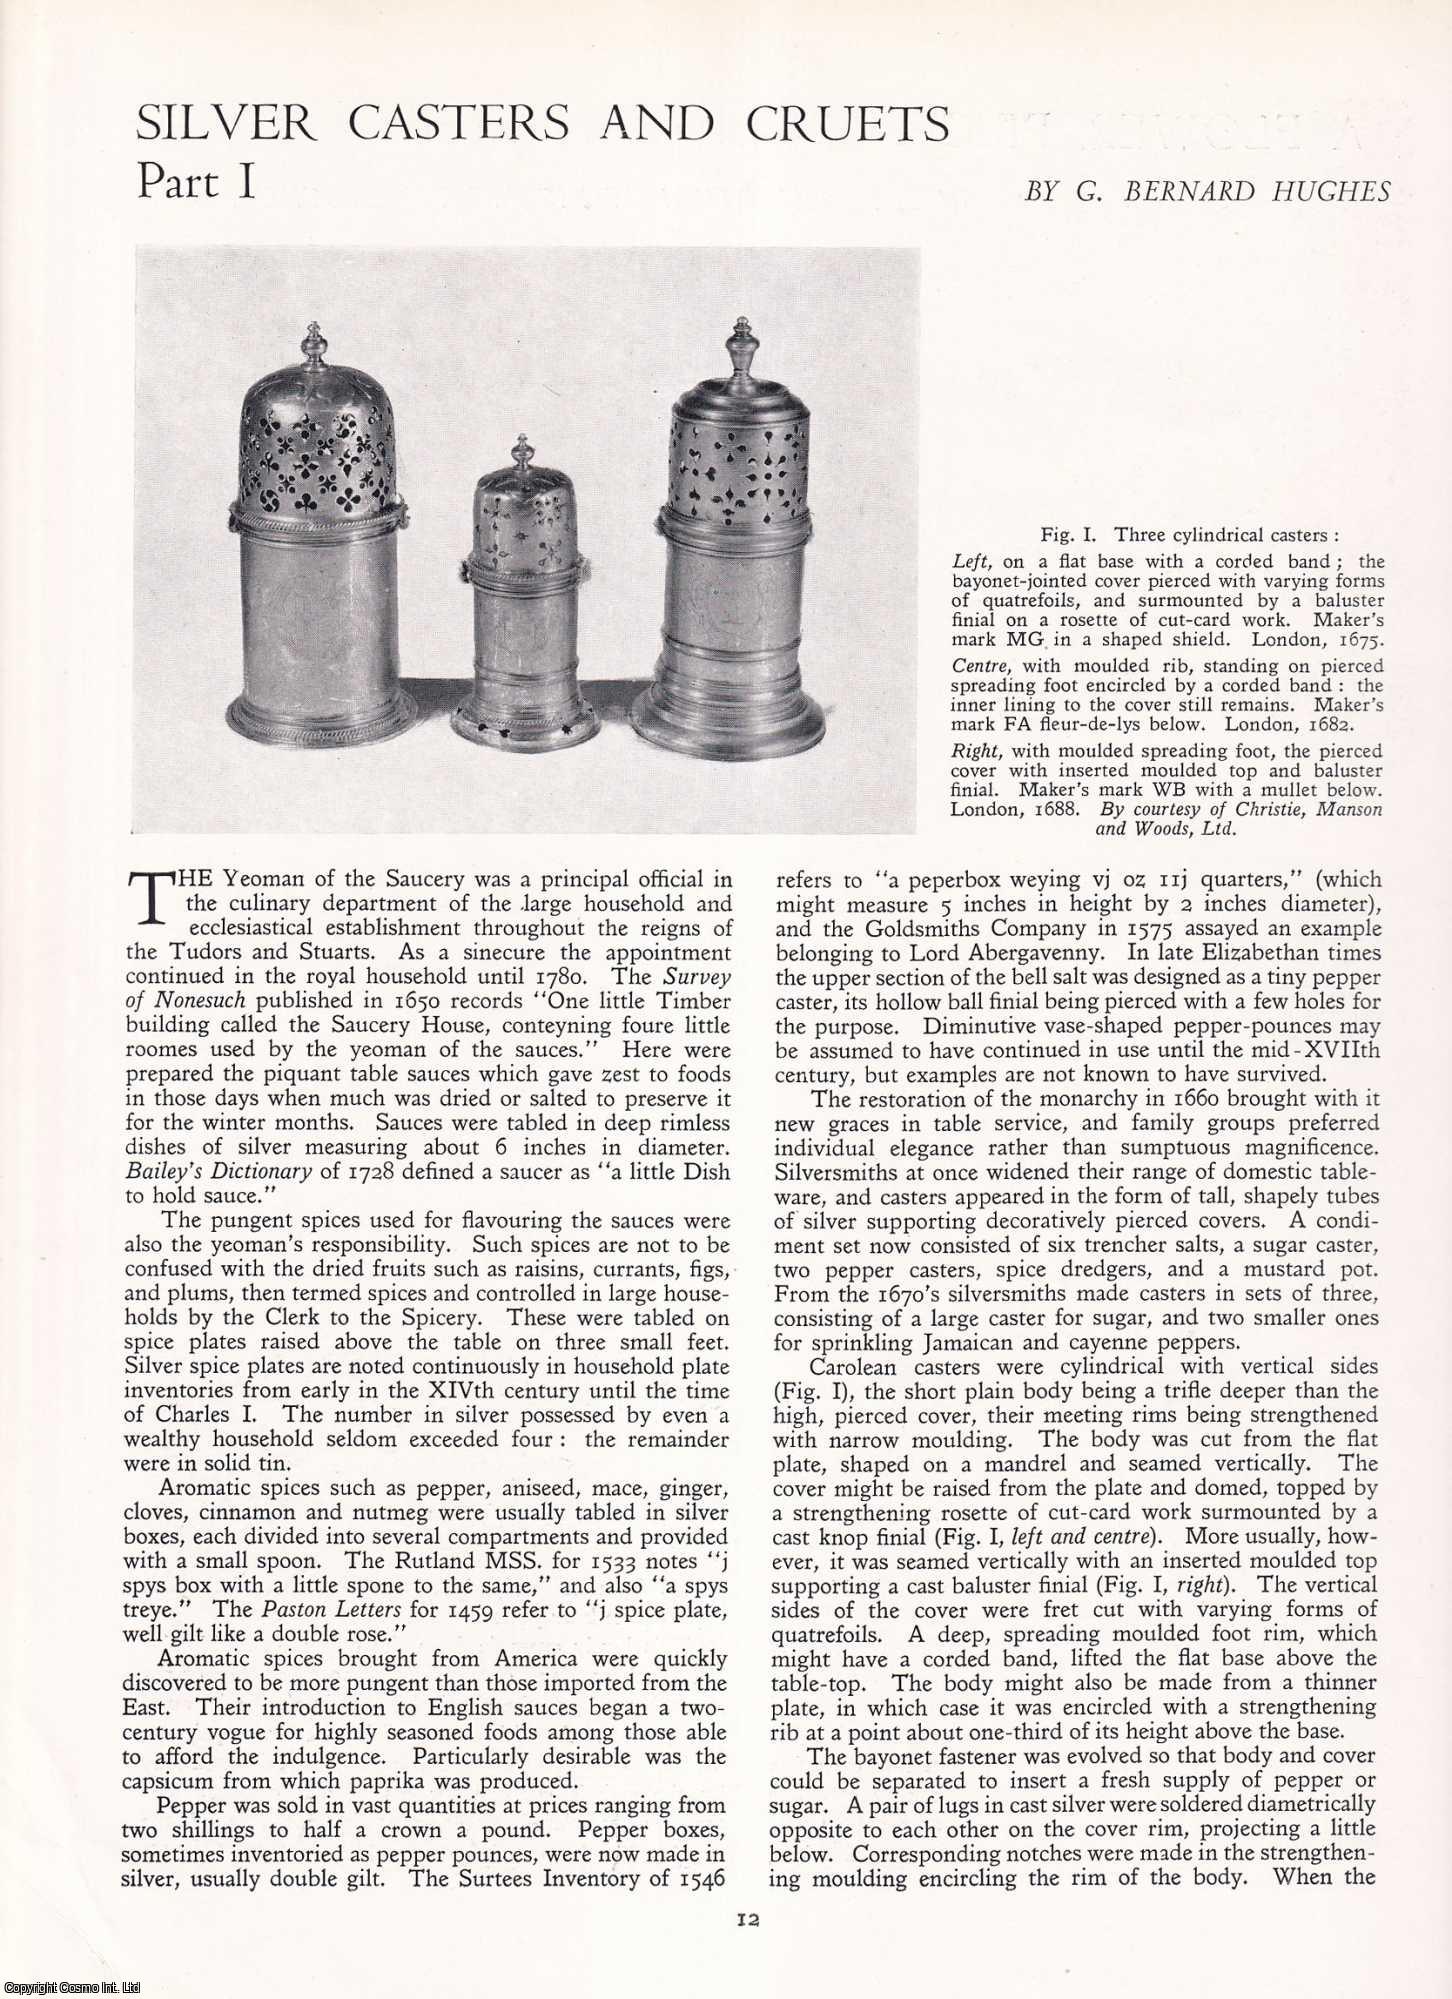 G. Bernard Hughes - Silver Casters and Cruets, Parts 1 and 2 only. An original article from Apollo, International Magazine of the Arts, 1954.